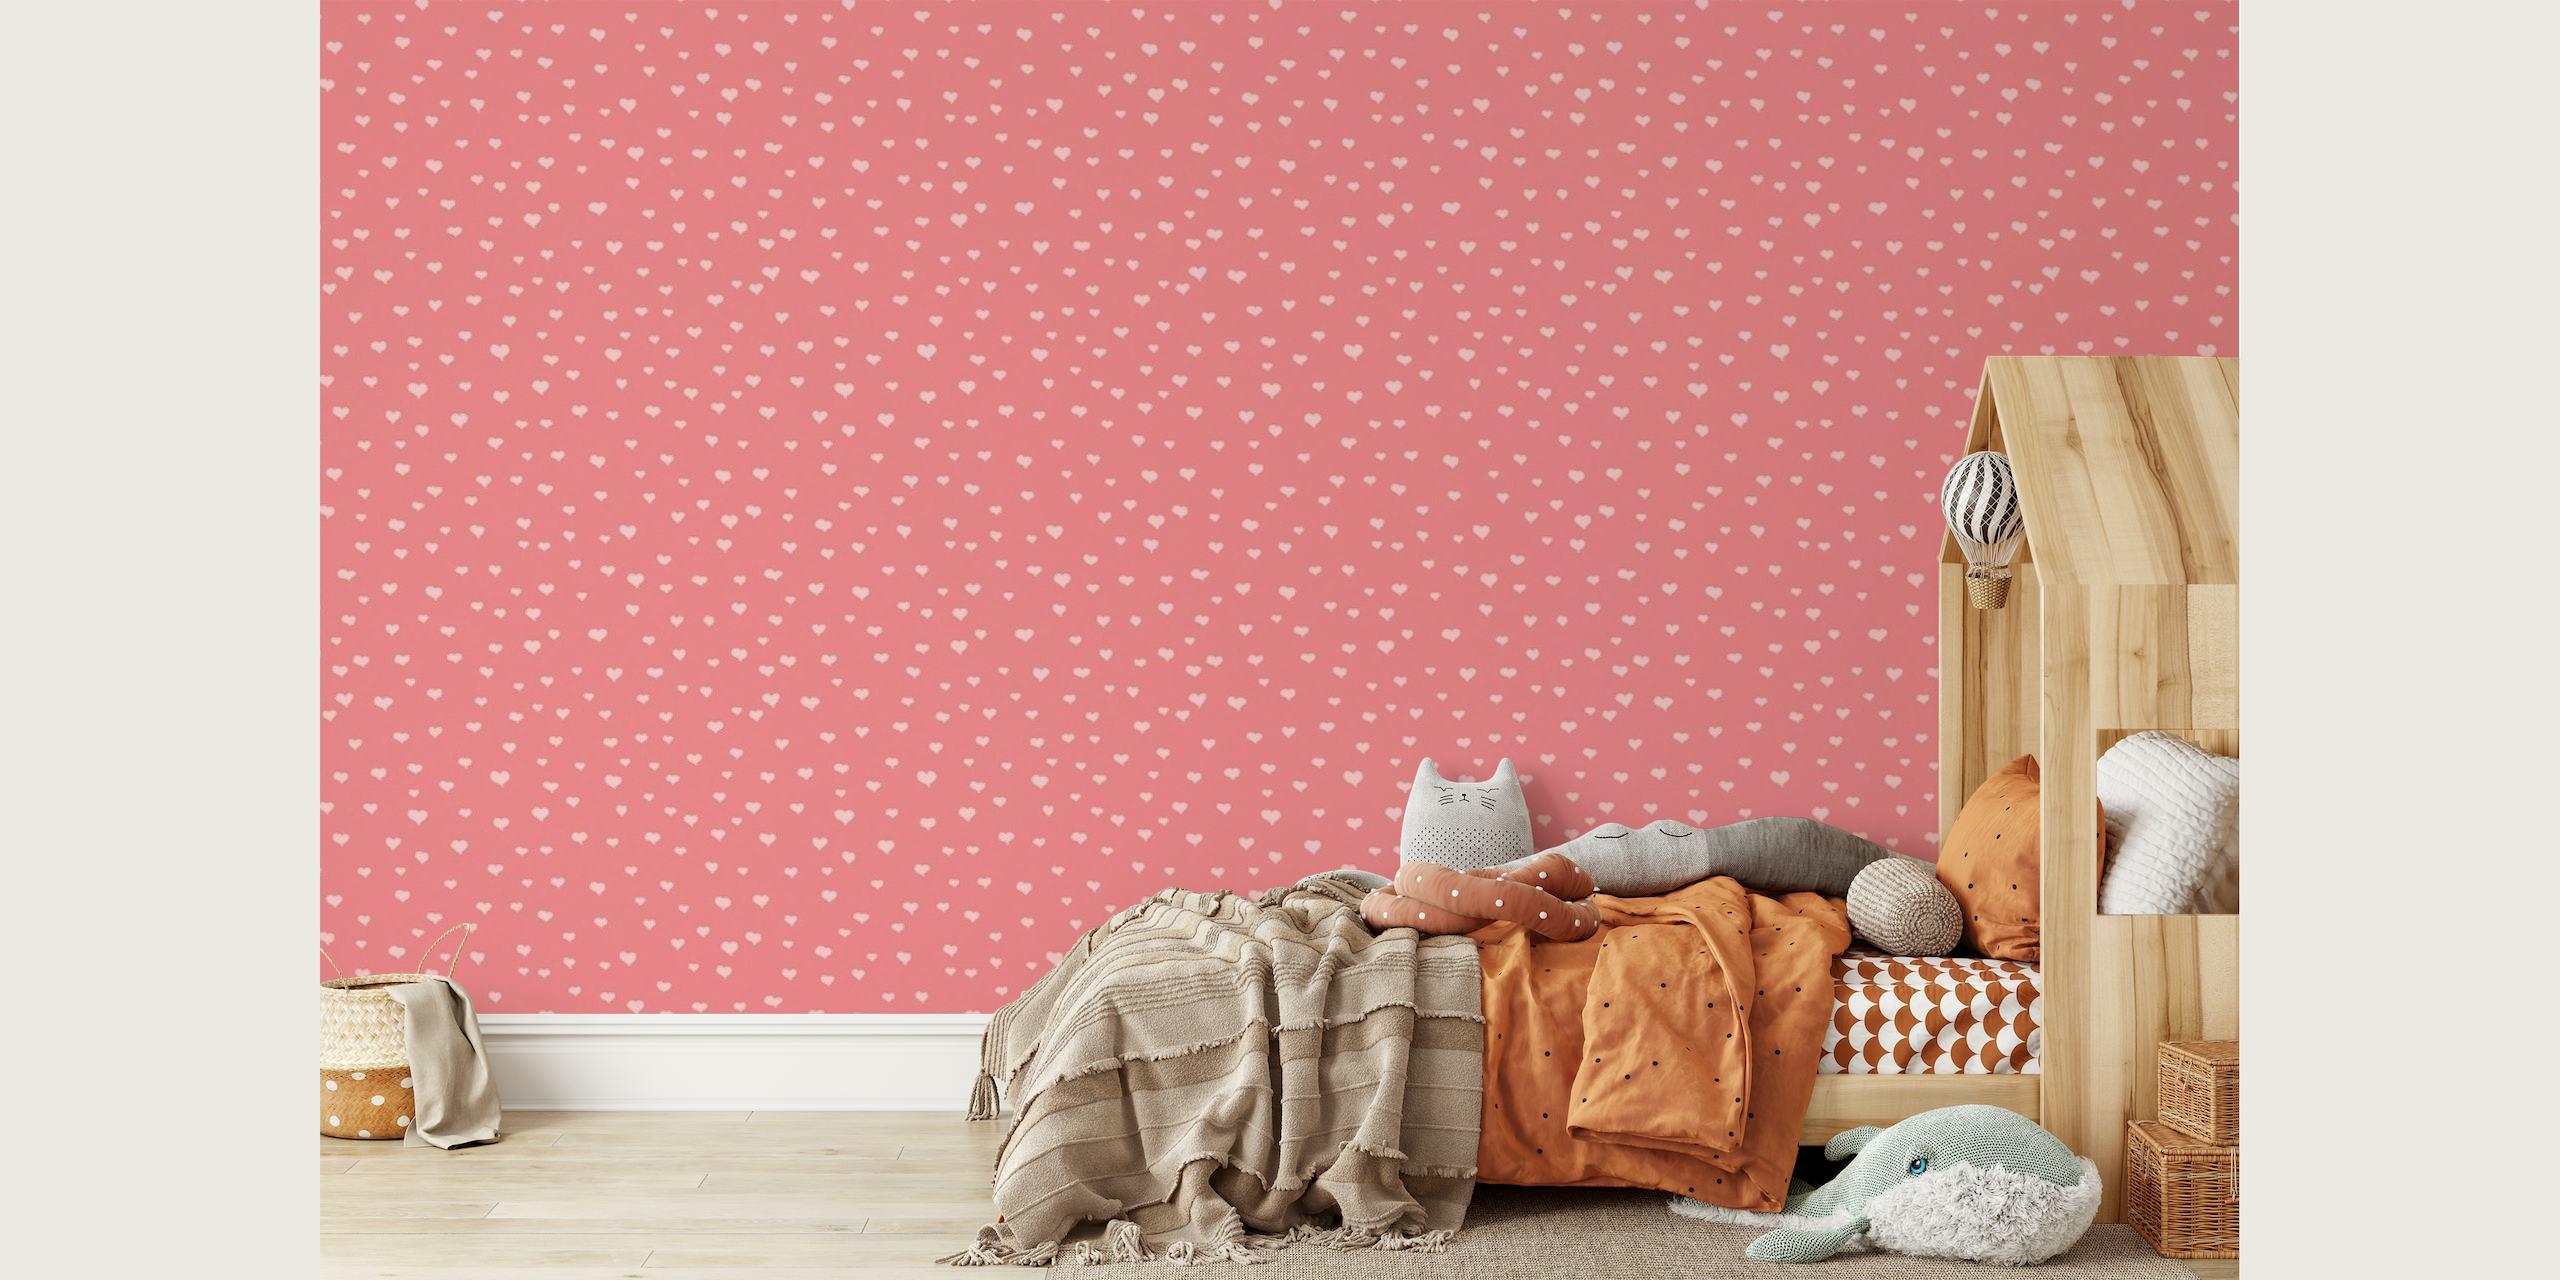 Freehand drawing hearts 5 wallpaper